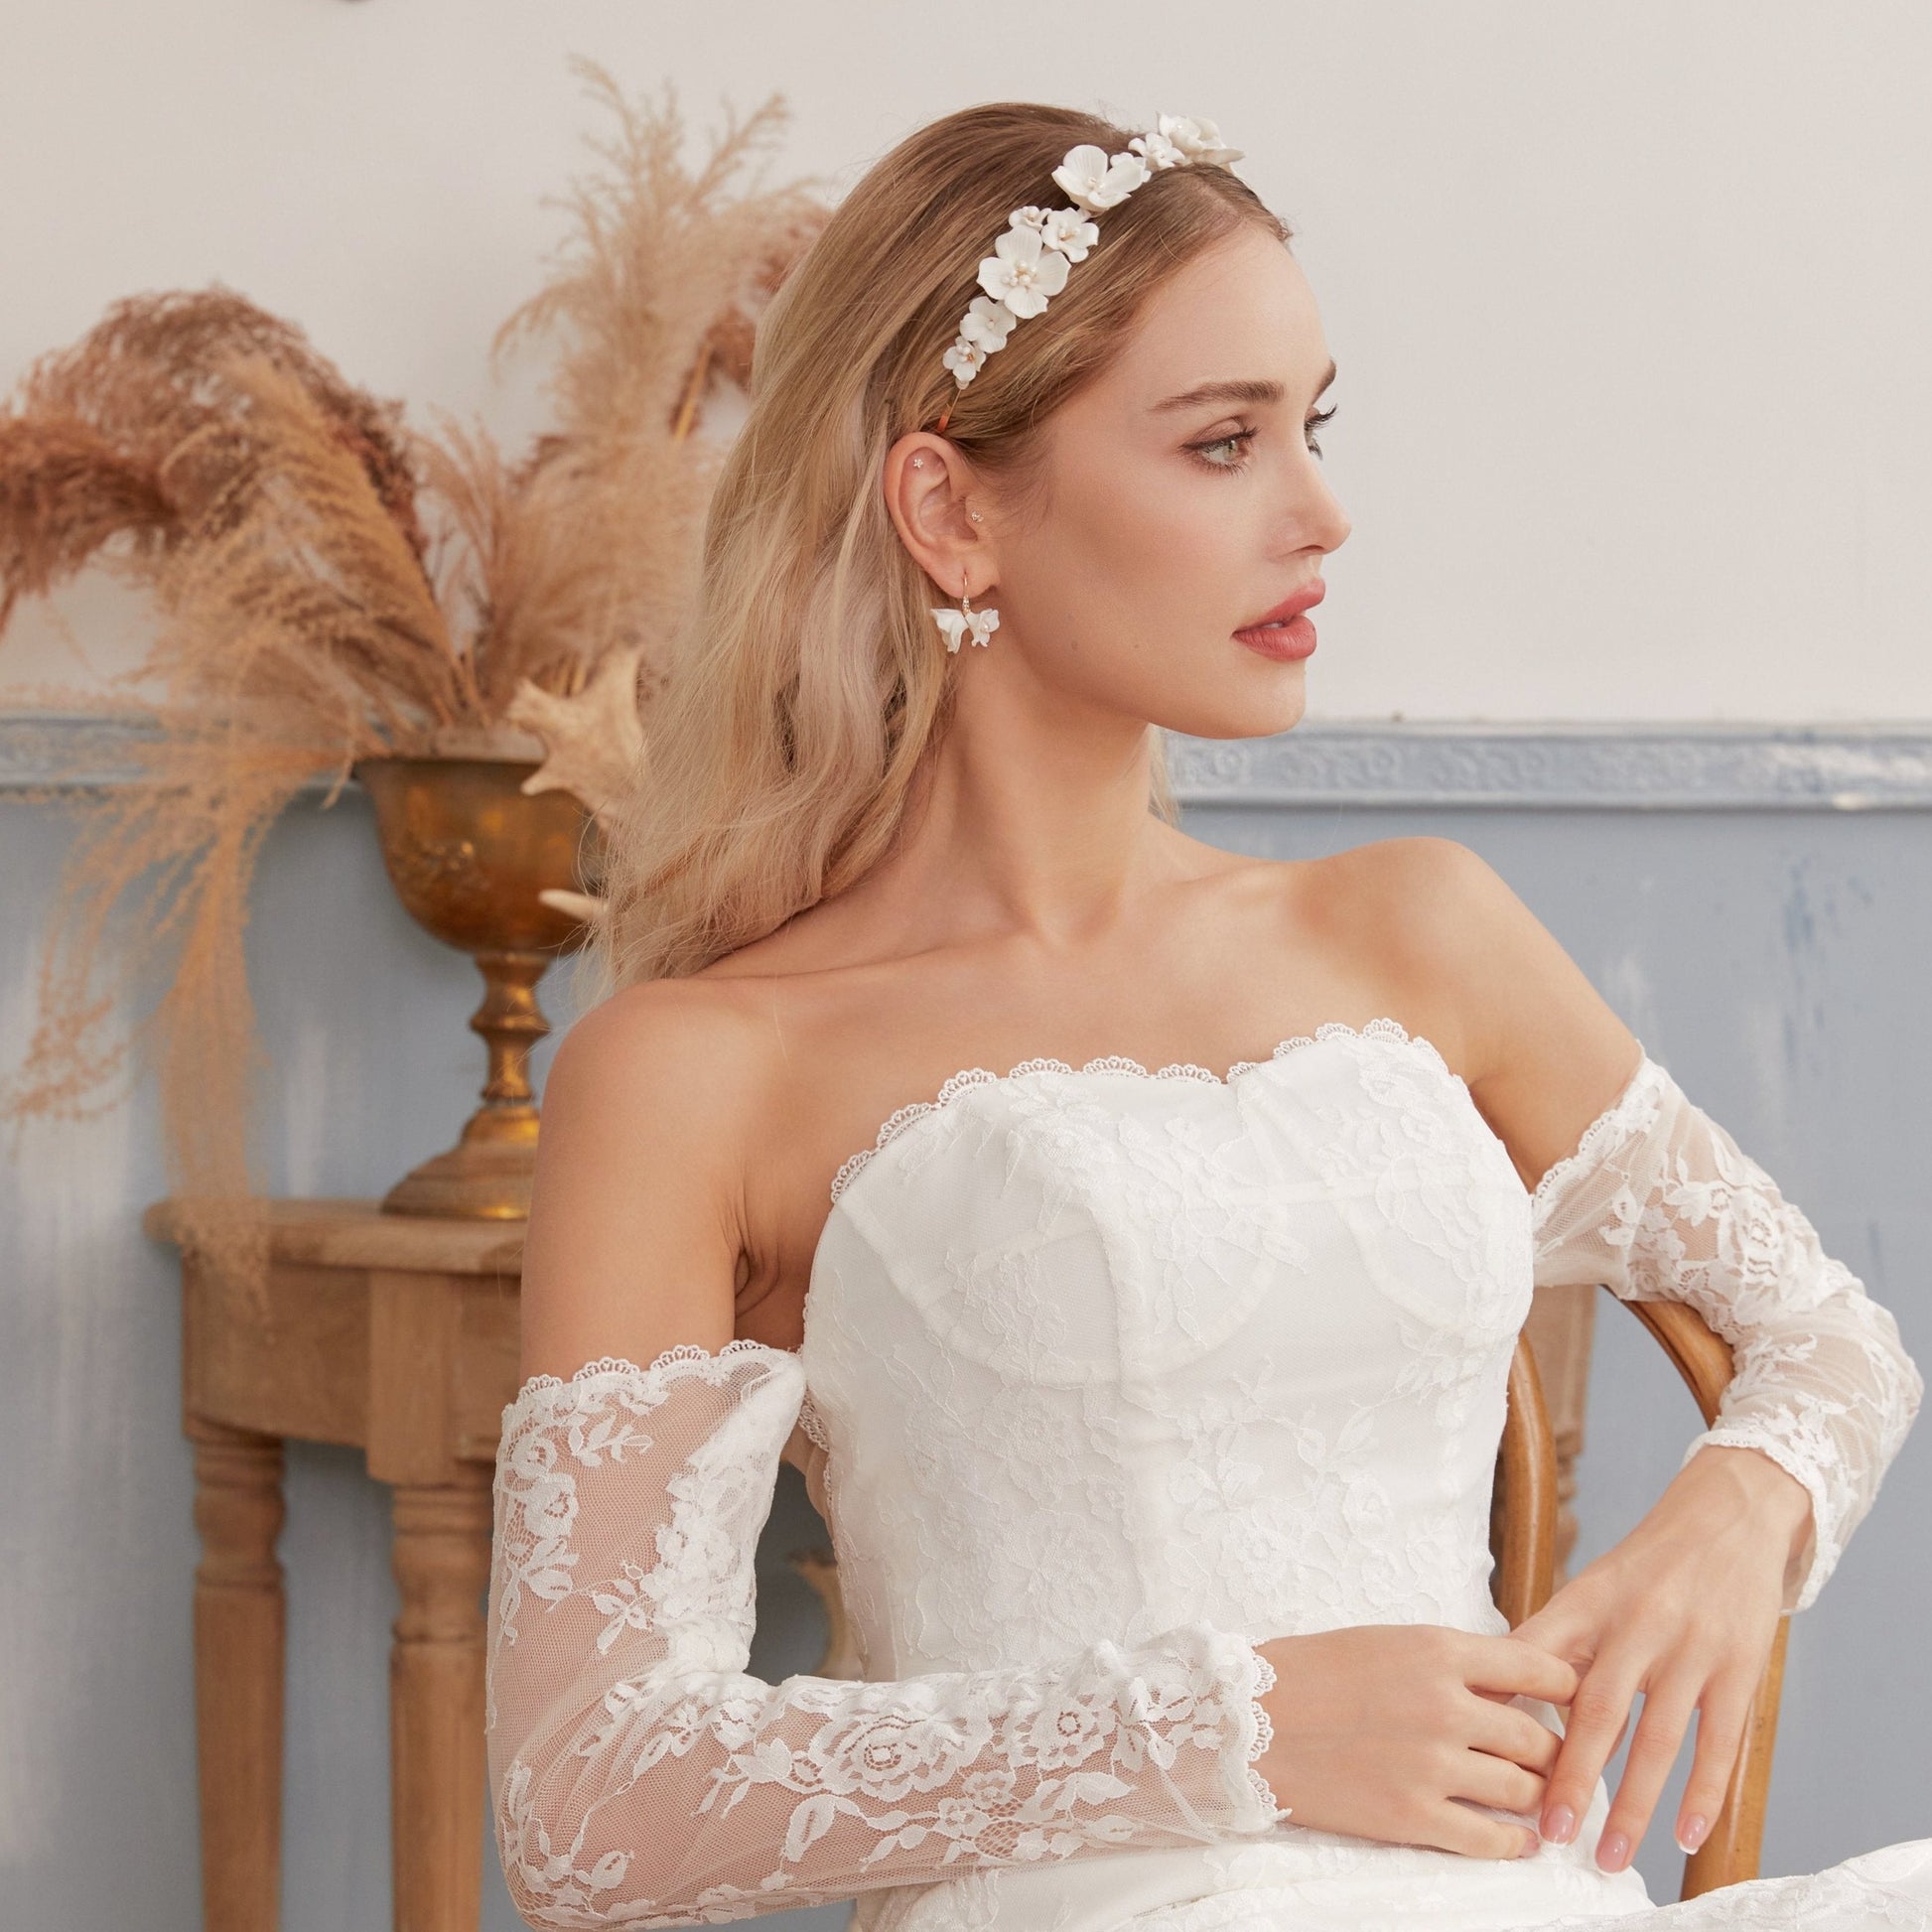 these flower bridal earrings  feature two delicate white clay flowers adorned with freshwater pearls and crystal-embellished French hooks that create a brilliant sparkle with every move.